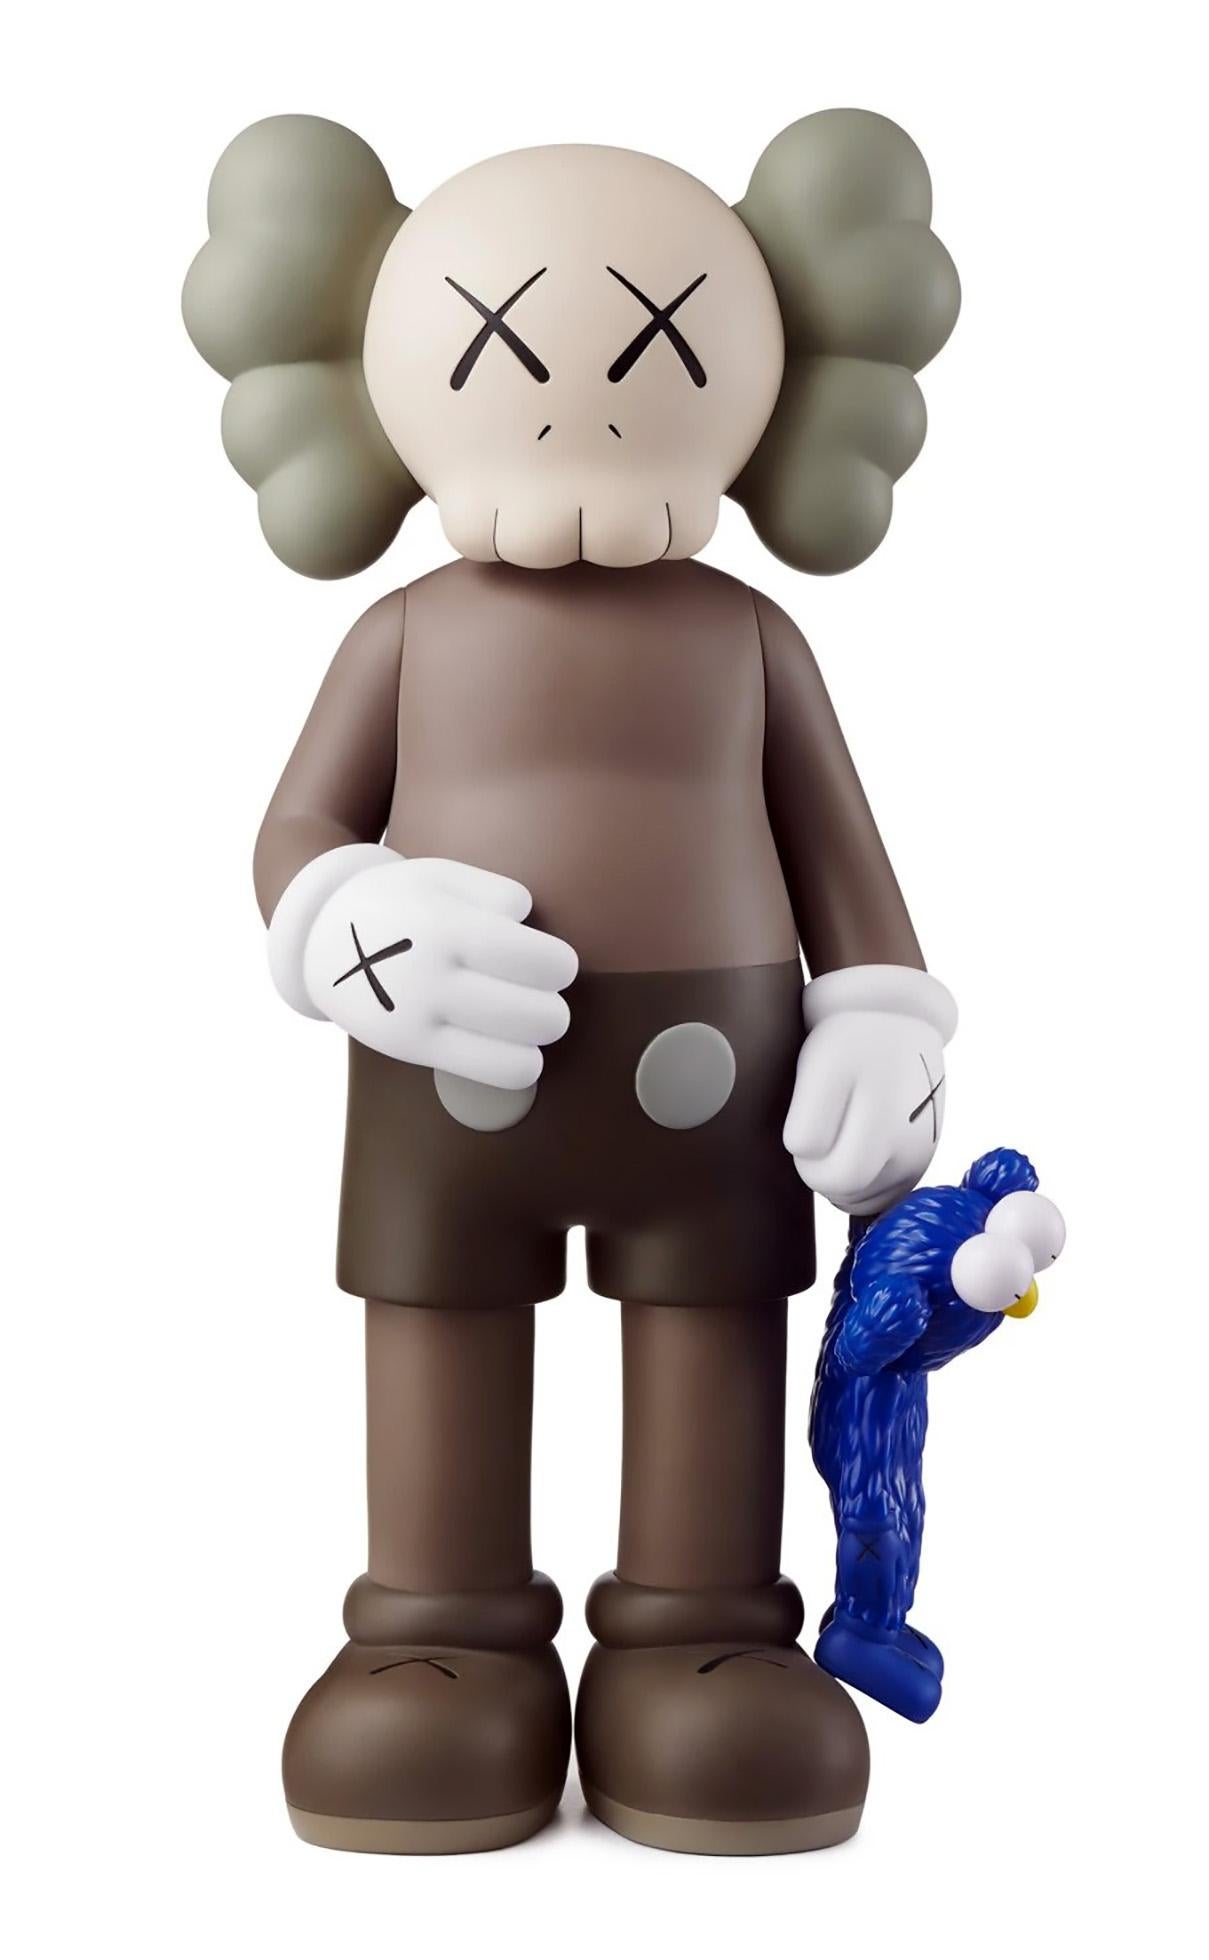 KAWS SHARE: Set of 2, each new & unopened in its original packaging. 

Medium: Painted Vinyl Cast Resin. 2020. 
12.4 x 6.3 inches (applies to each individual).
New, unopened in its original box; excellent condition.  
From a sold out edition of